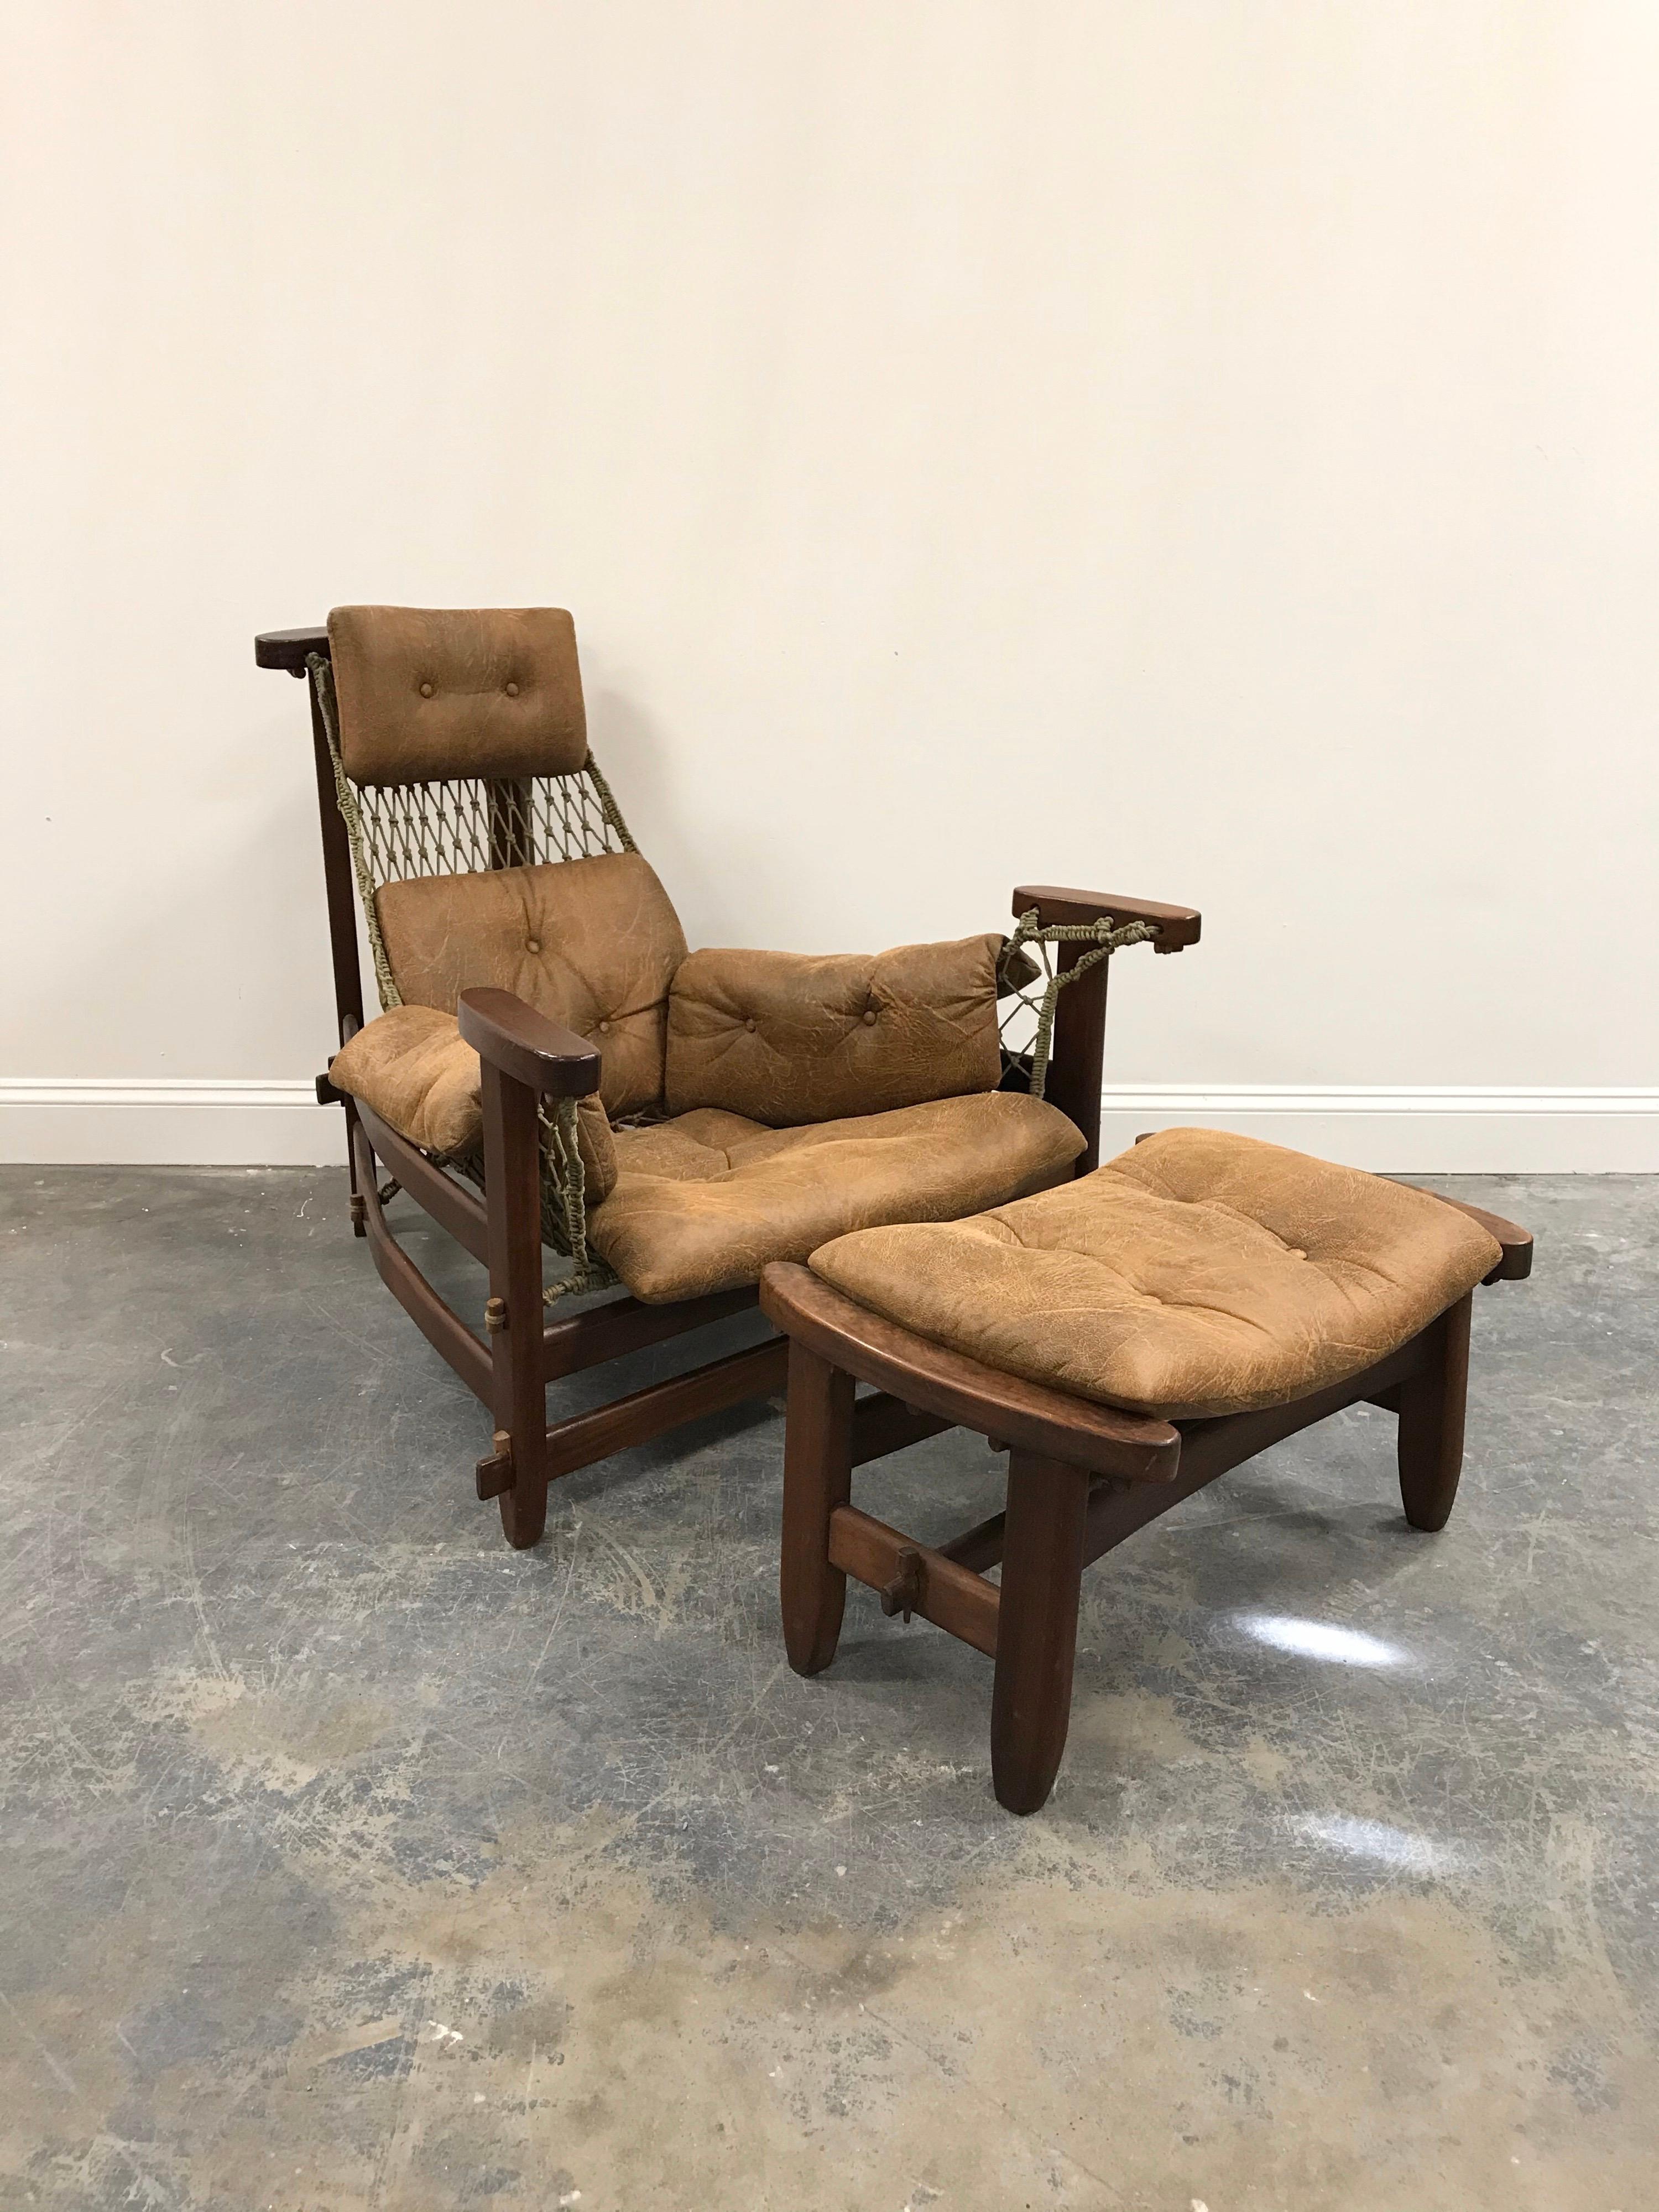 Excellent example of Brazilian Modernism. This Jean Gillon “Jangada” chair and ottoman is in wonderful condition. Chair features a Jacaranda wood frame, woven sling support net, and upholstered seating. Upholstery appears to be a synthetic suede